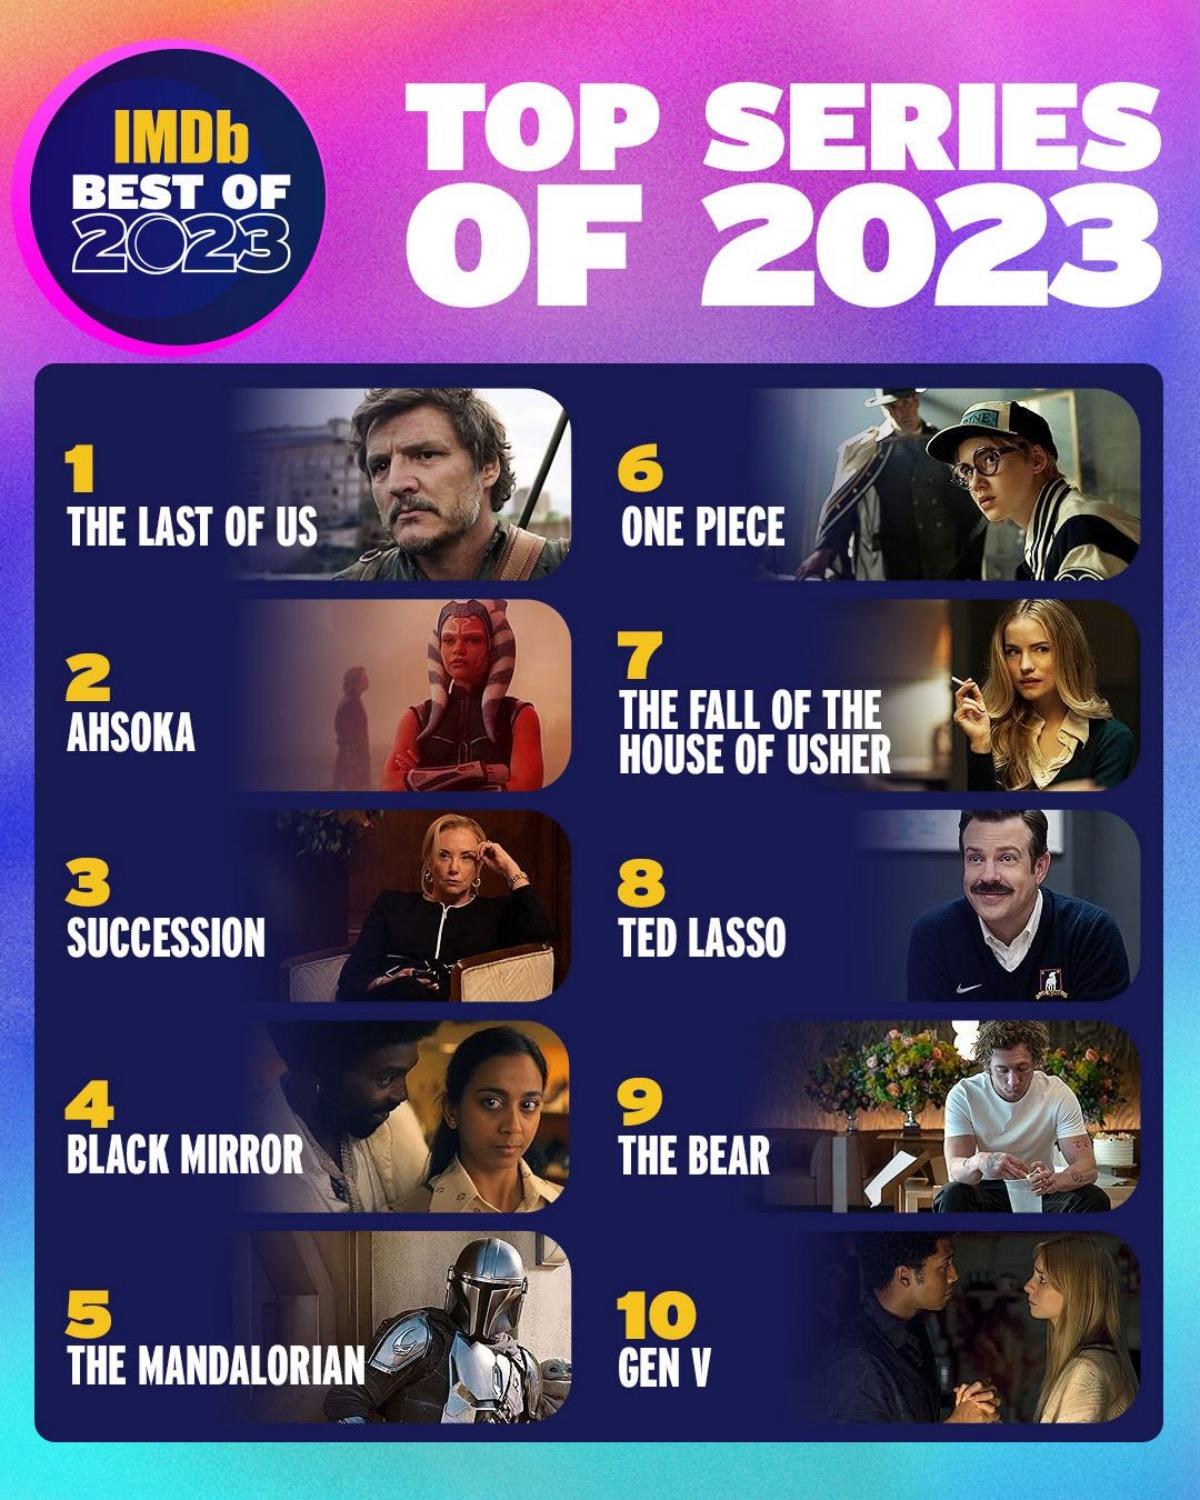 The top fan-favorite TV shows of 2023 so far, as ranked by IMDb